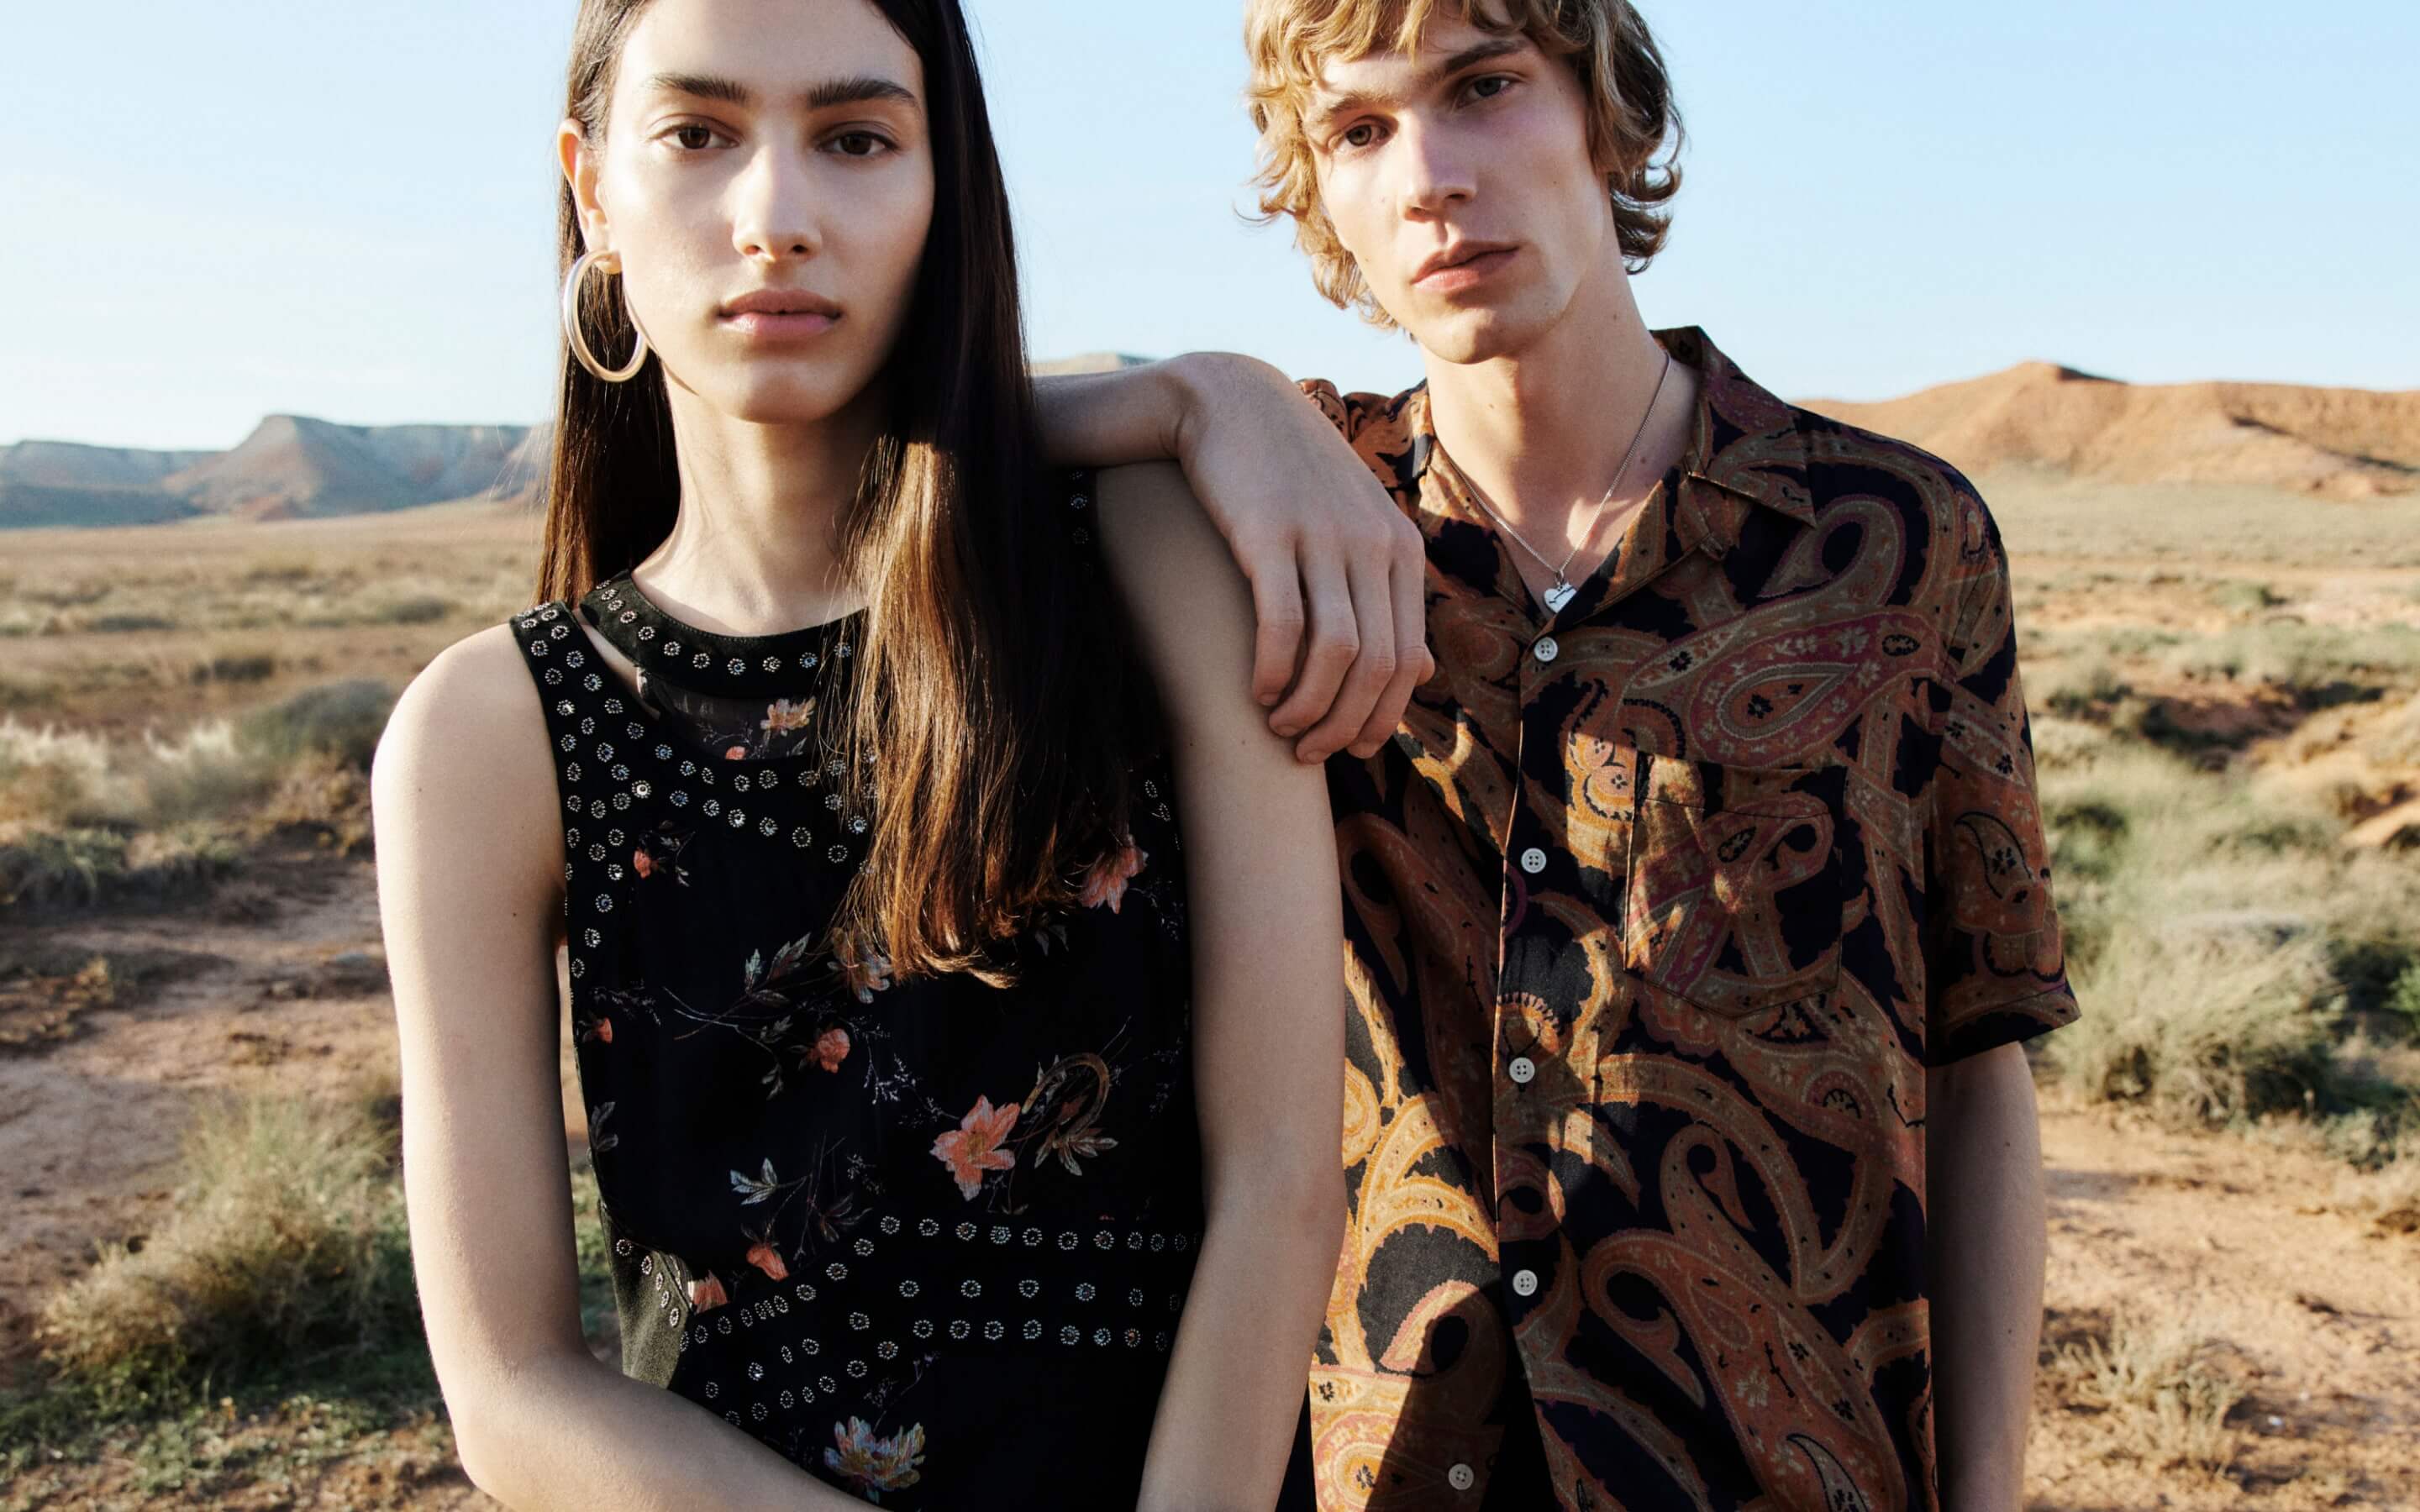 A woman wearing a black embellished floral dress and hoop earrings and a man wearing a paisley print shirt and a heart pendant silver necklace standing in front of a desert landscape.